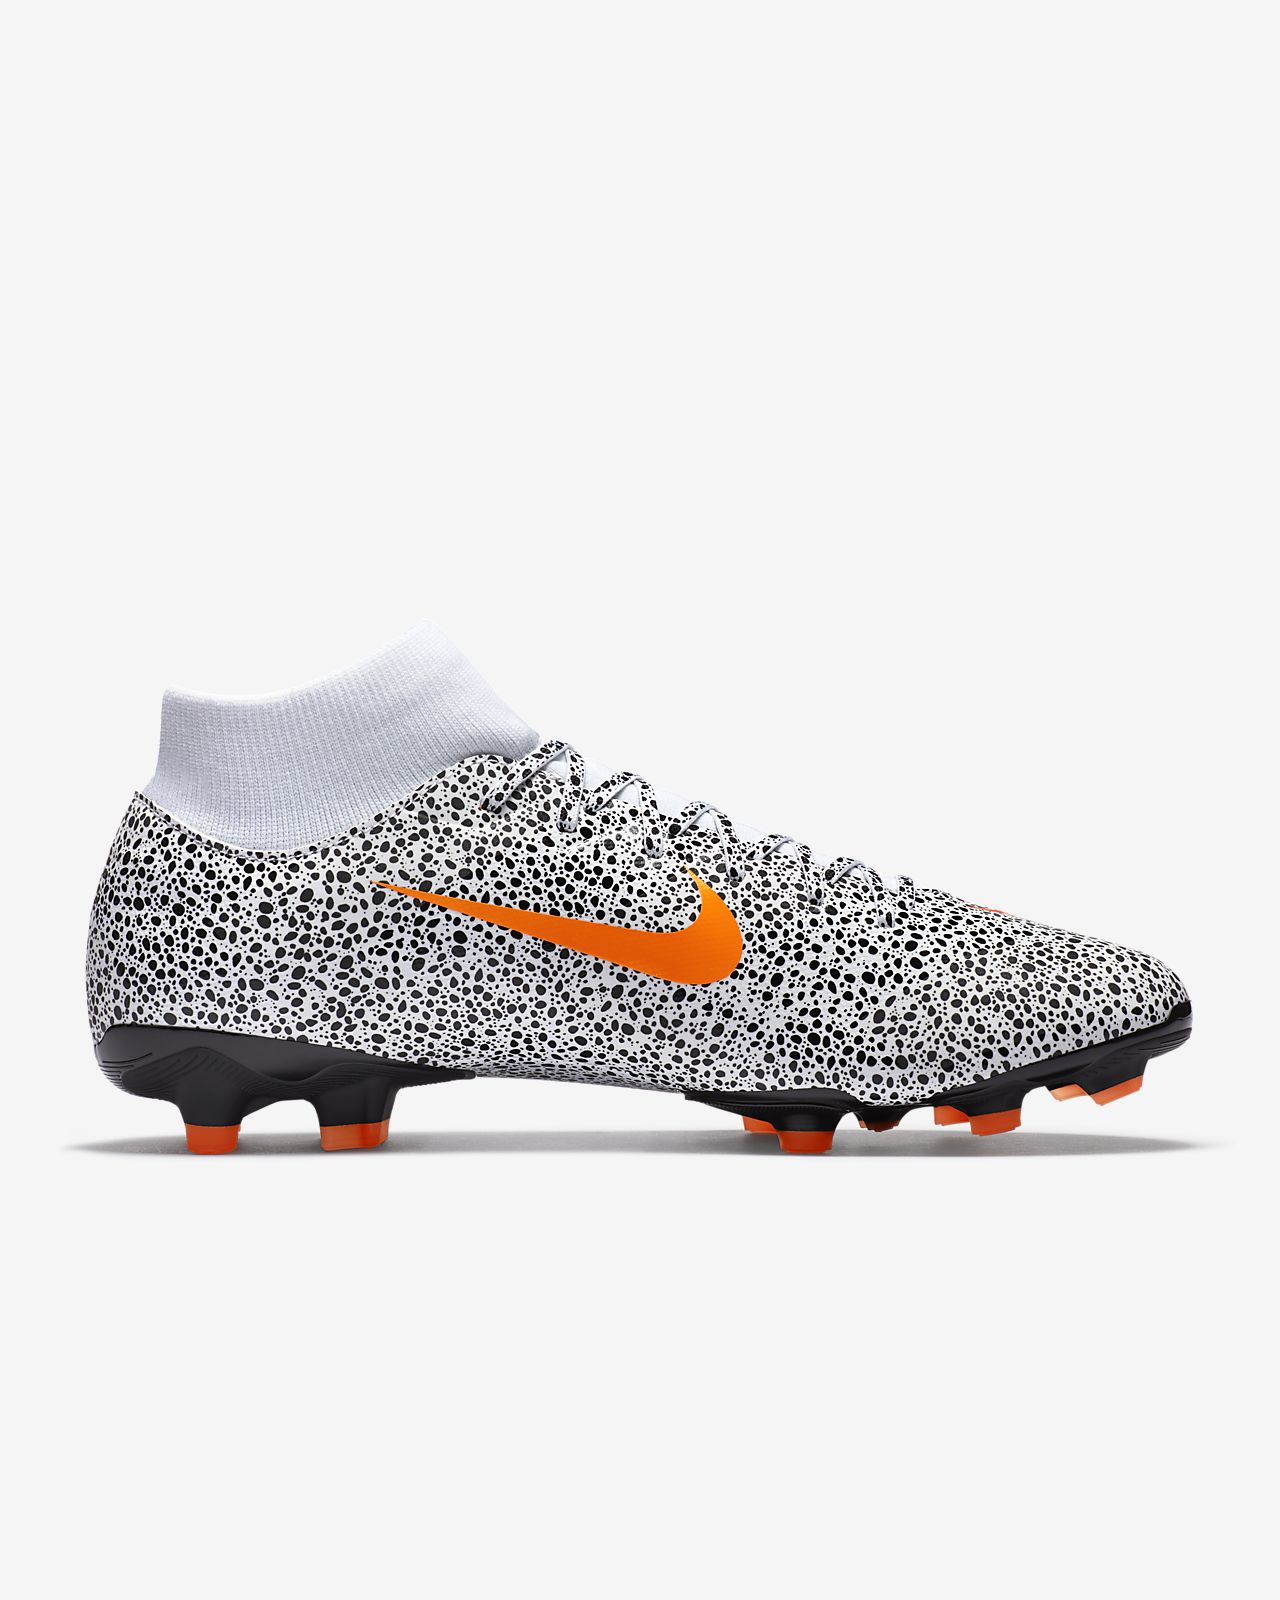 Win the Nike CR7 Mercurial Superfly Born Leader Soccer Cleats